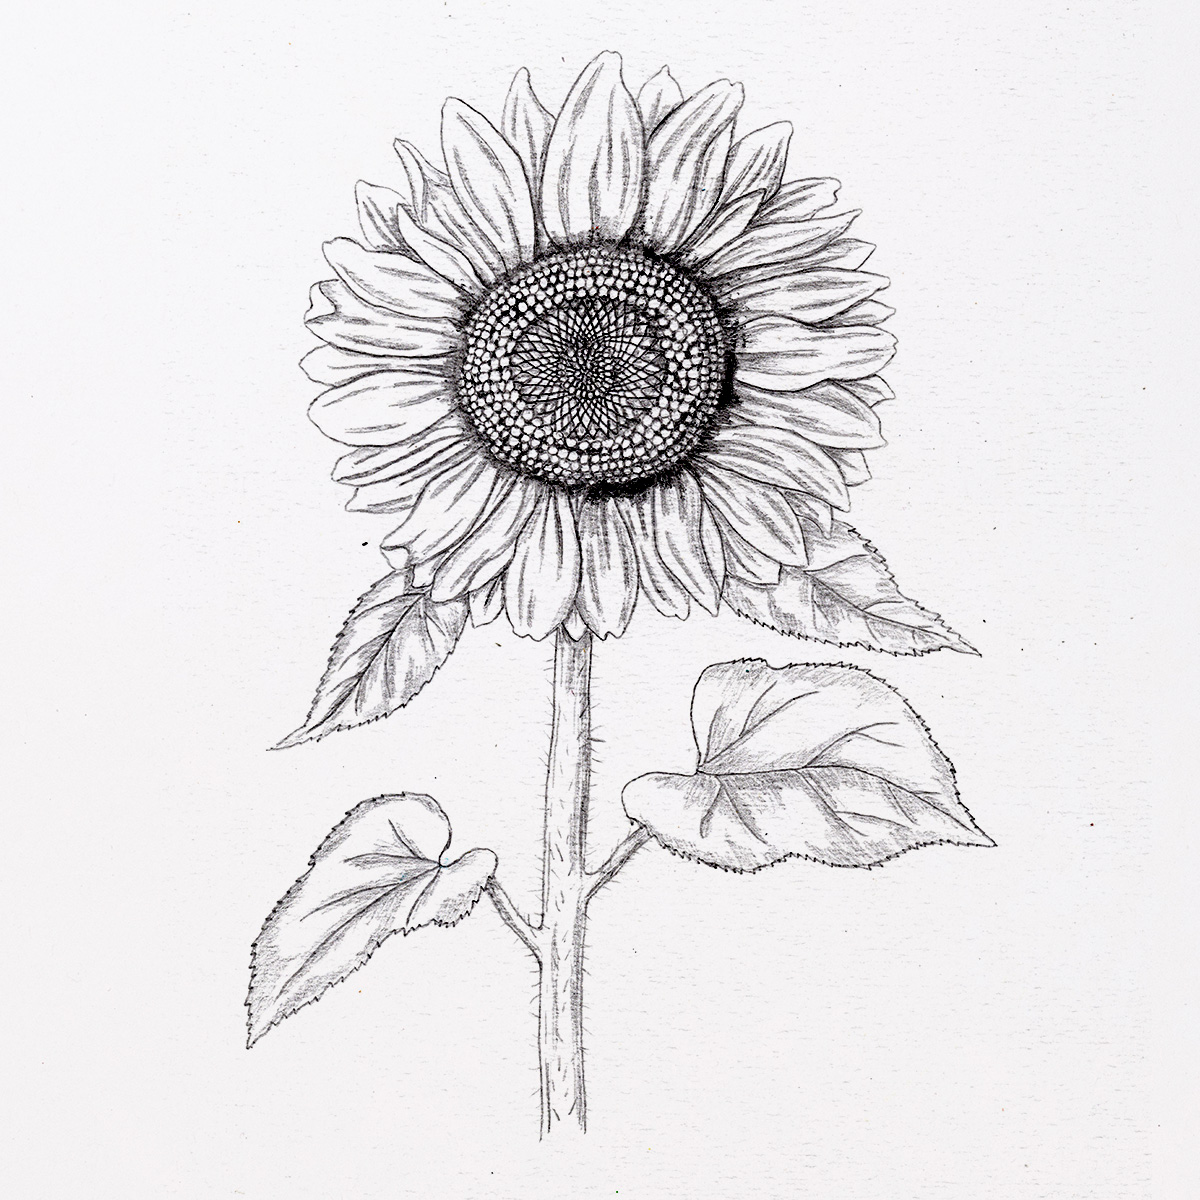 Pencil Drawing Of Raindrop Sunflower | Artificial Design